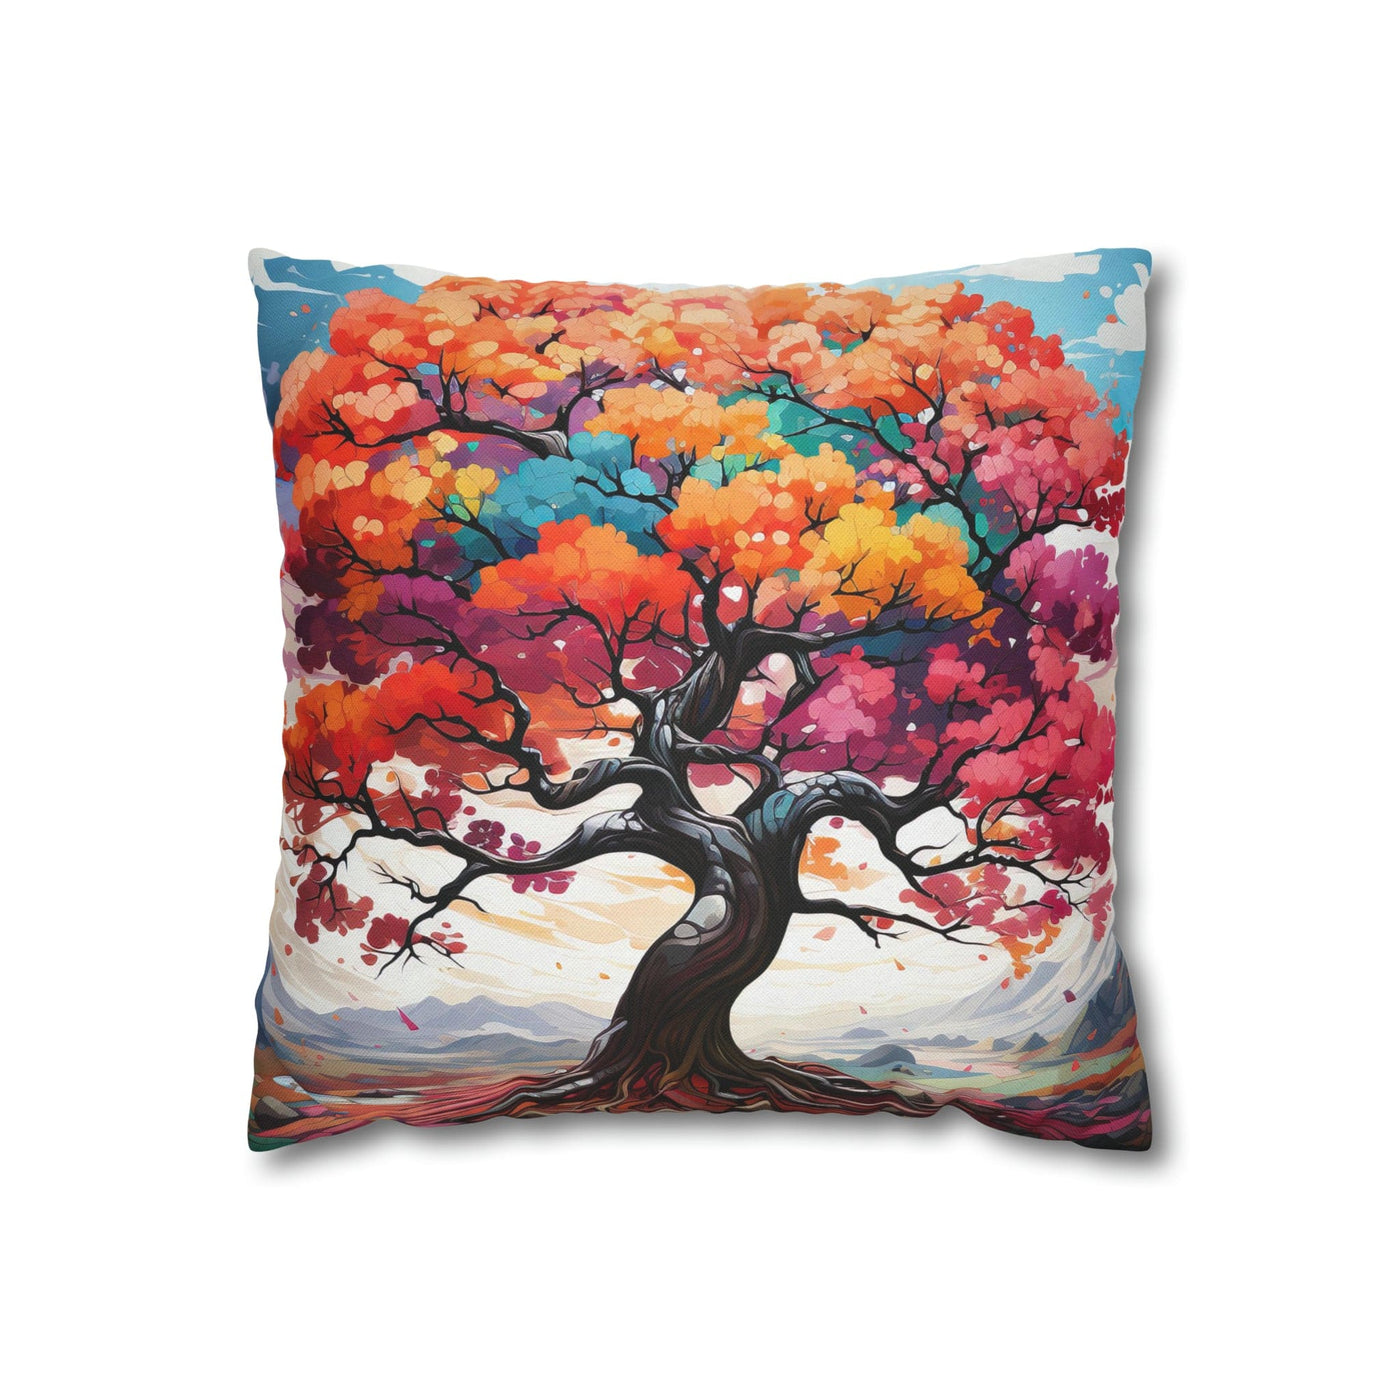 Decorative Throw Pillow Covers With Zipper - Set Of 2 Multicolor Psychedelic